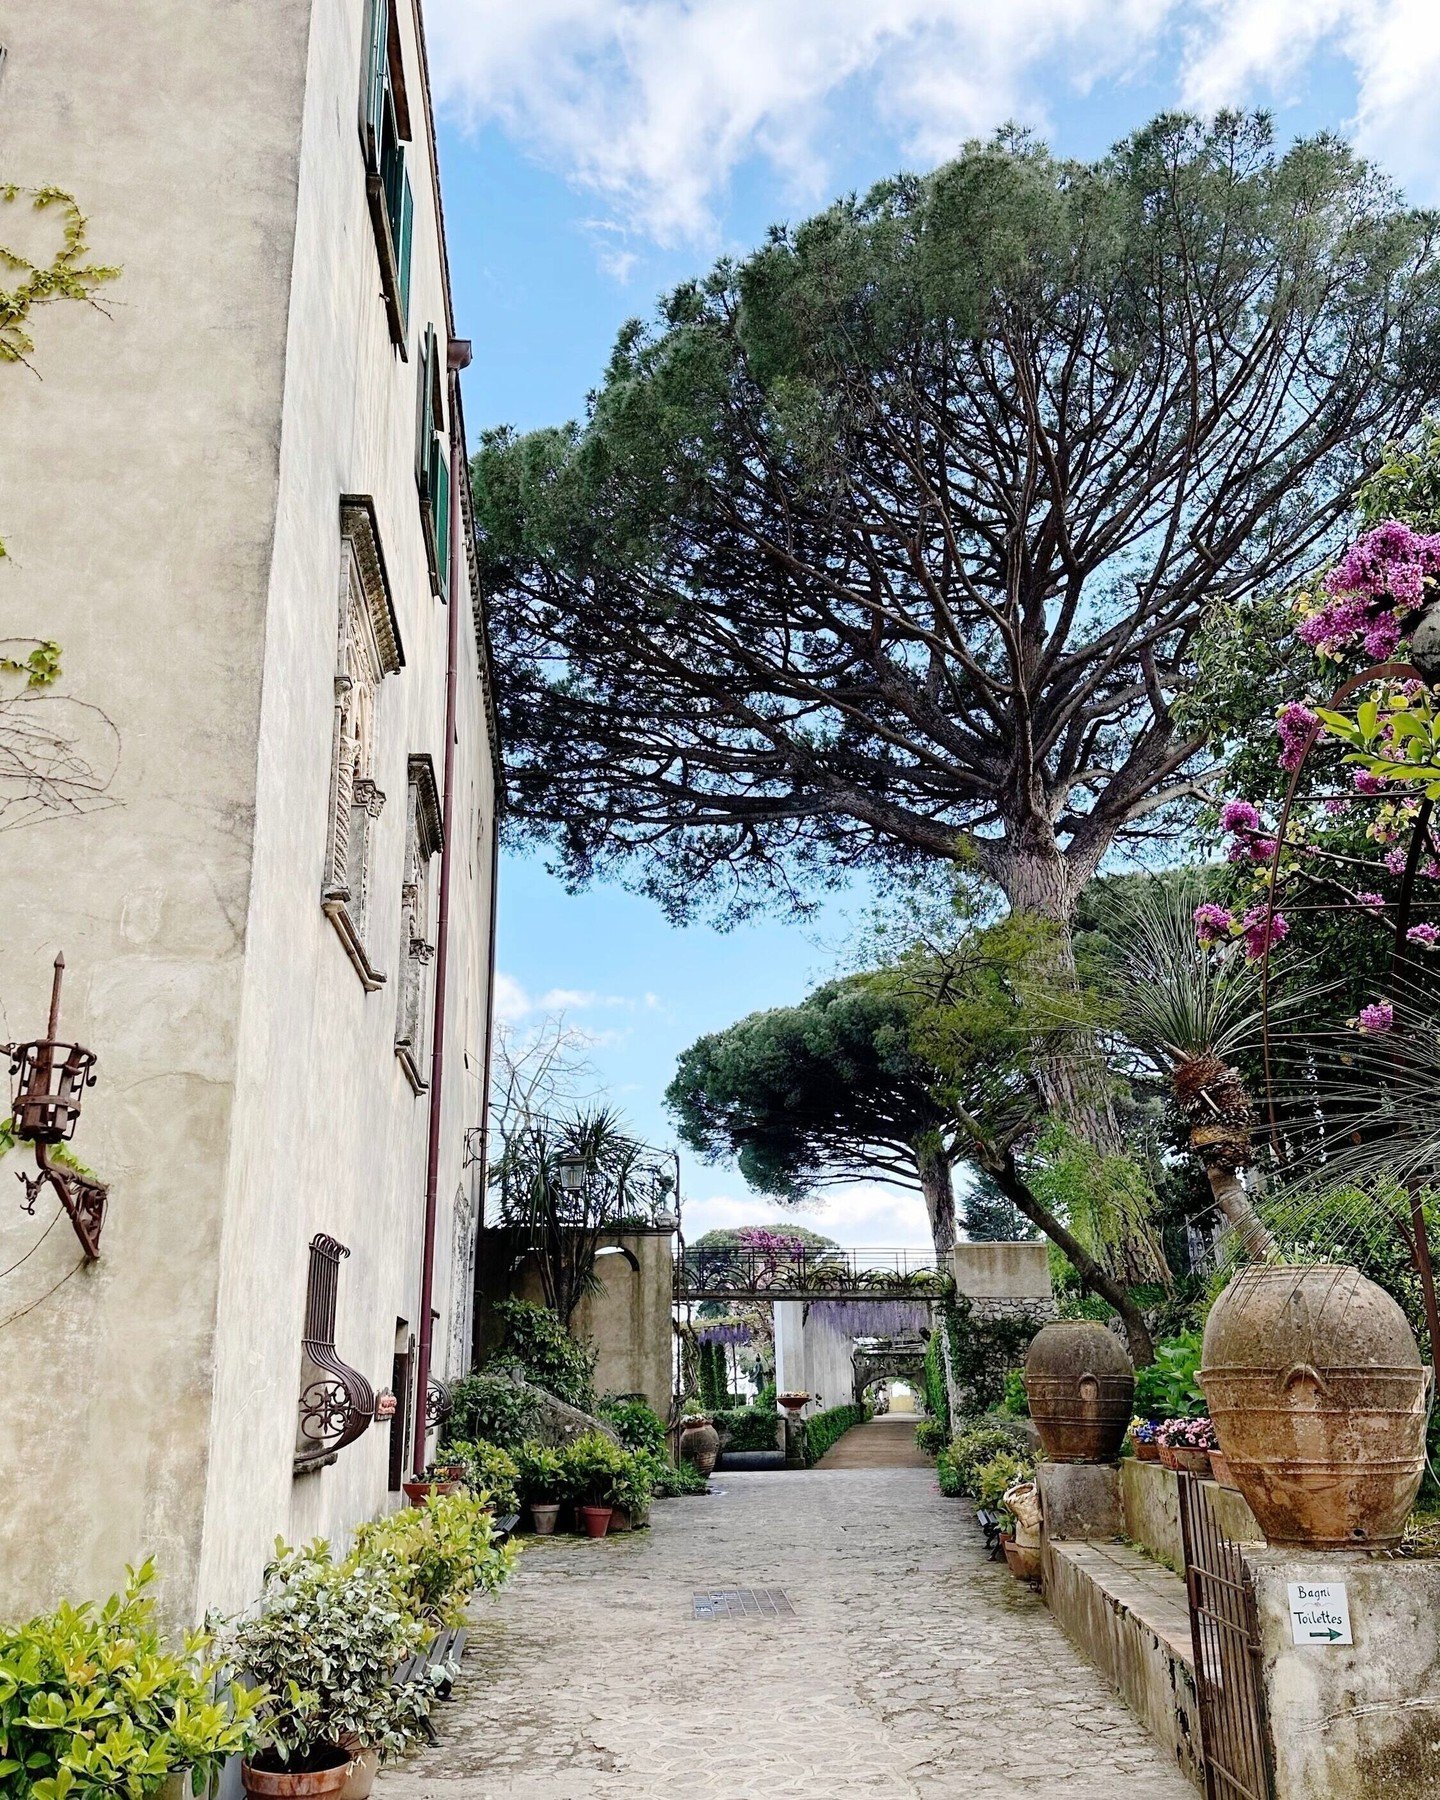 One of Ravello&rsquo;s most stunning spots, Villa Cimbrone&rsquo;s sprawling 20 acres are ideal for a relaxed walk. As you wander through the gorgeous gardens, take in the beauty of colorful flowers, fascinating sculptures, and the famous Terrace of 